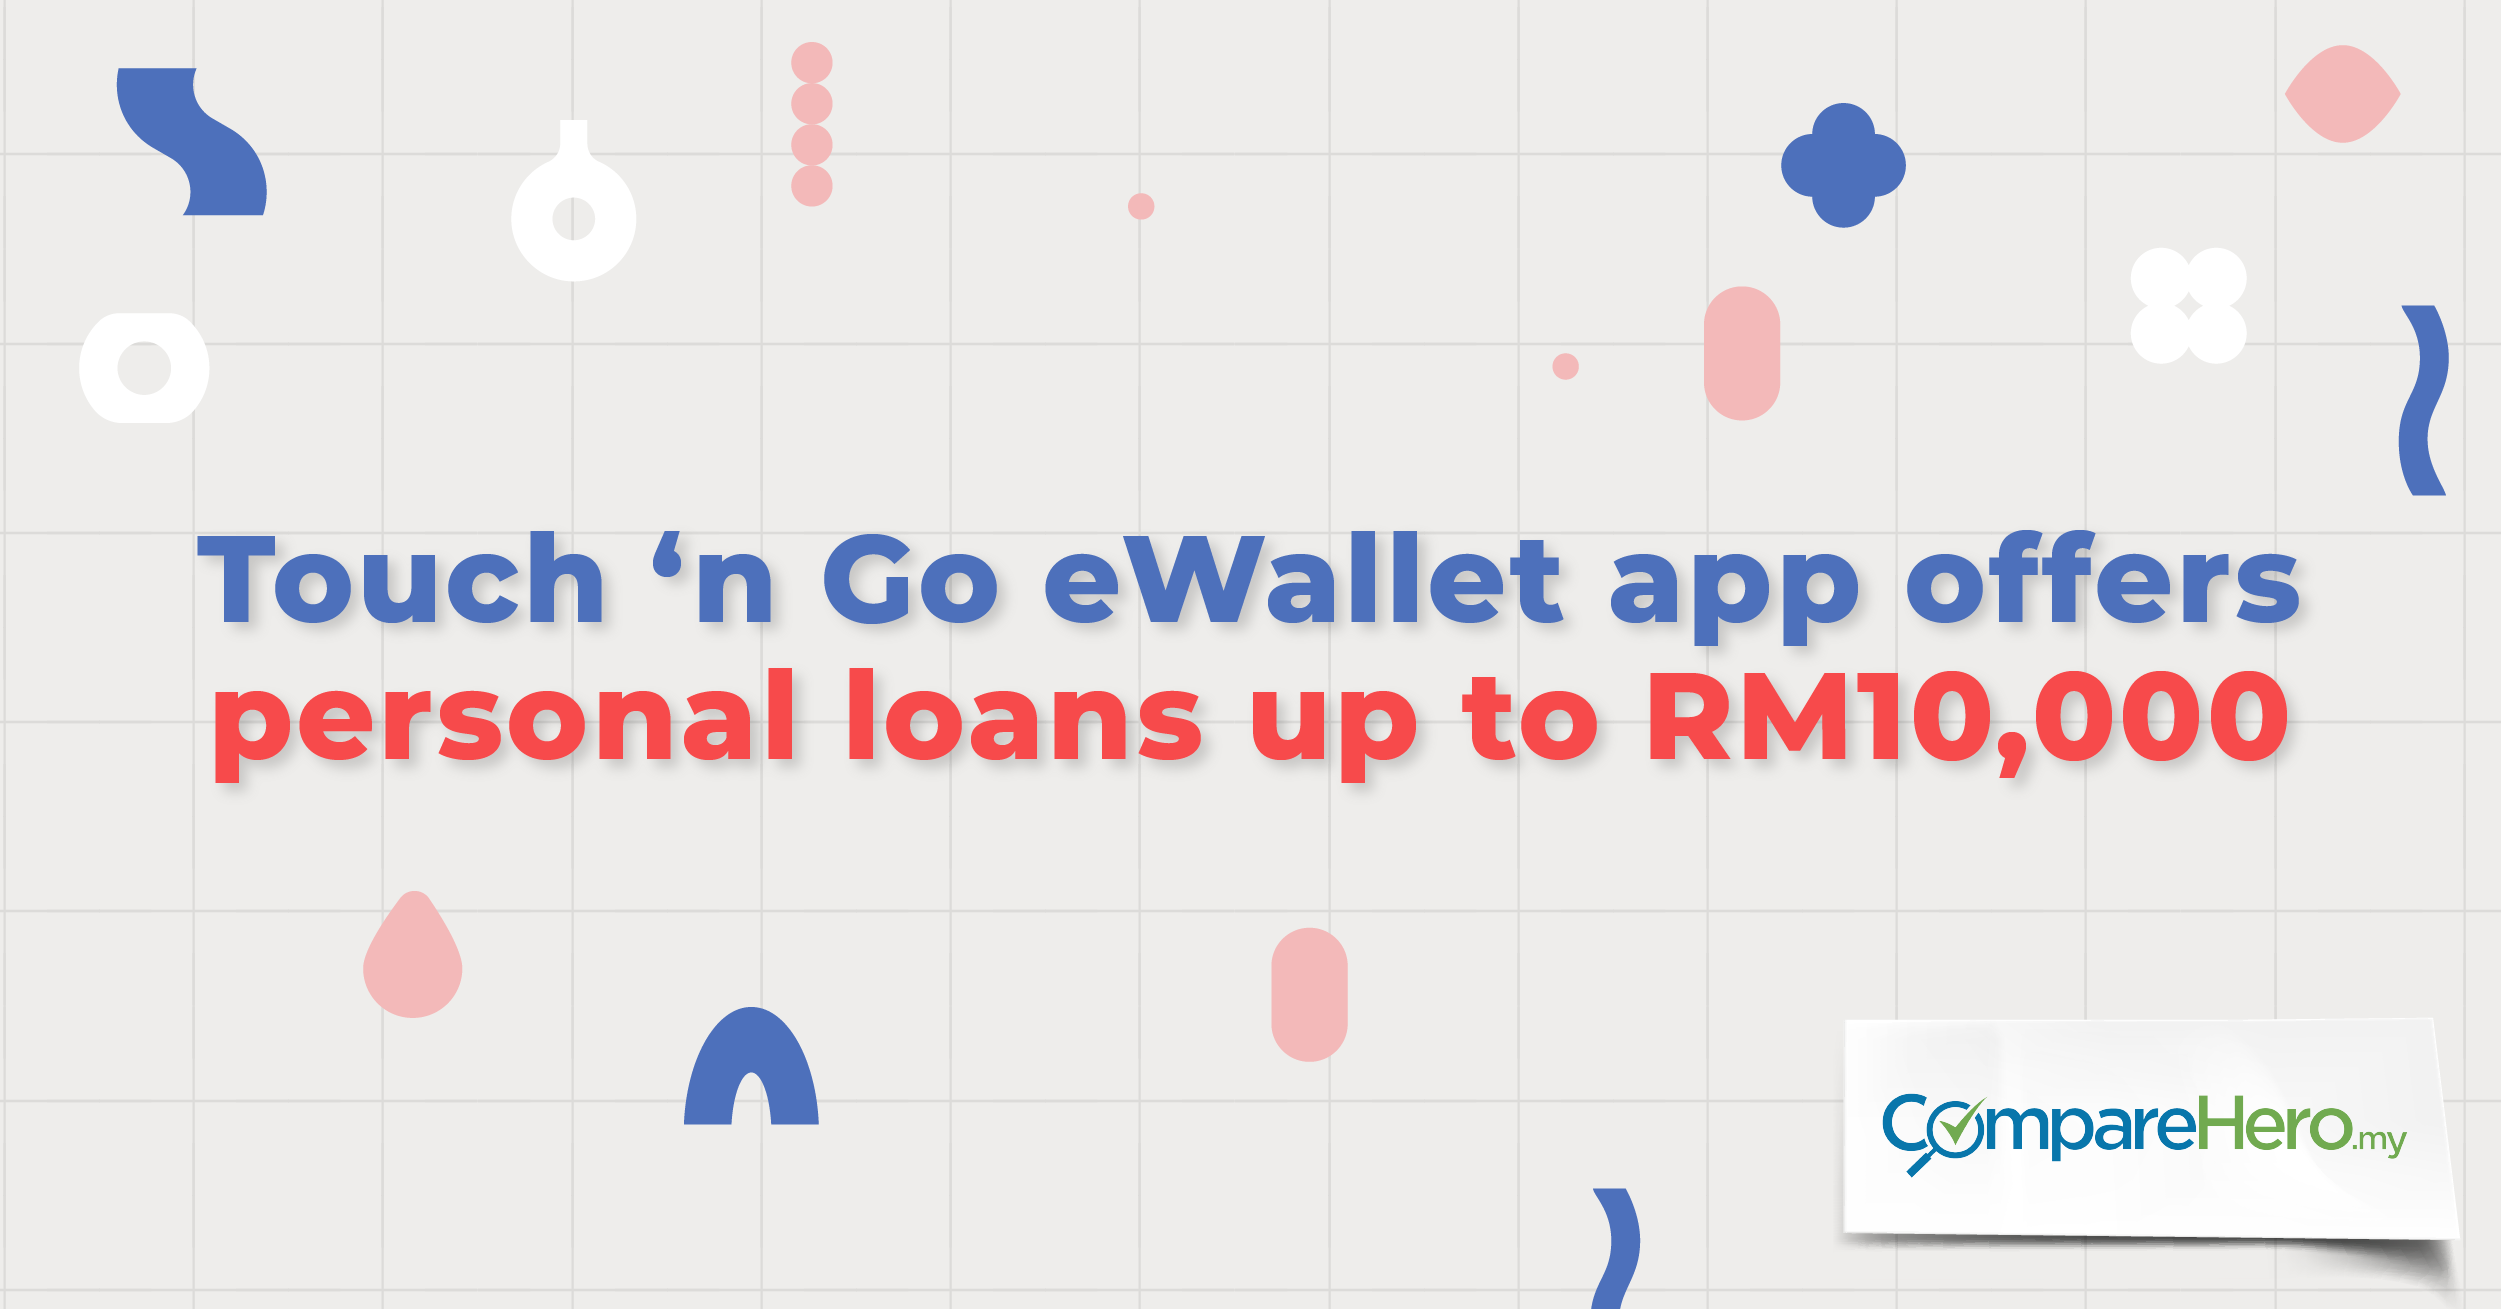 Touch ‘n Go eWallet app offers personal loans up to RM10,000